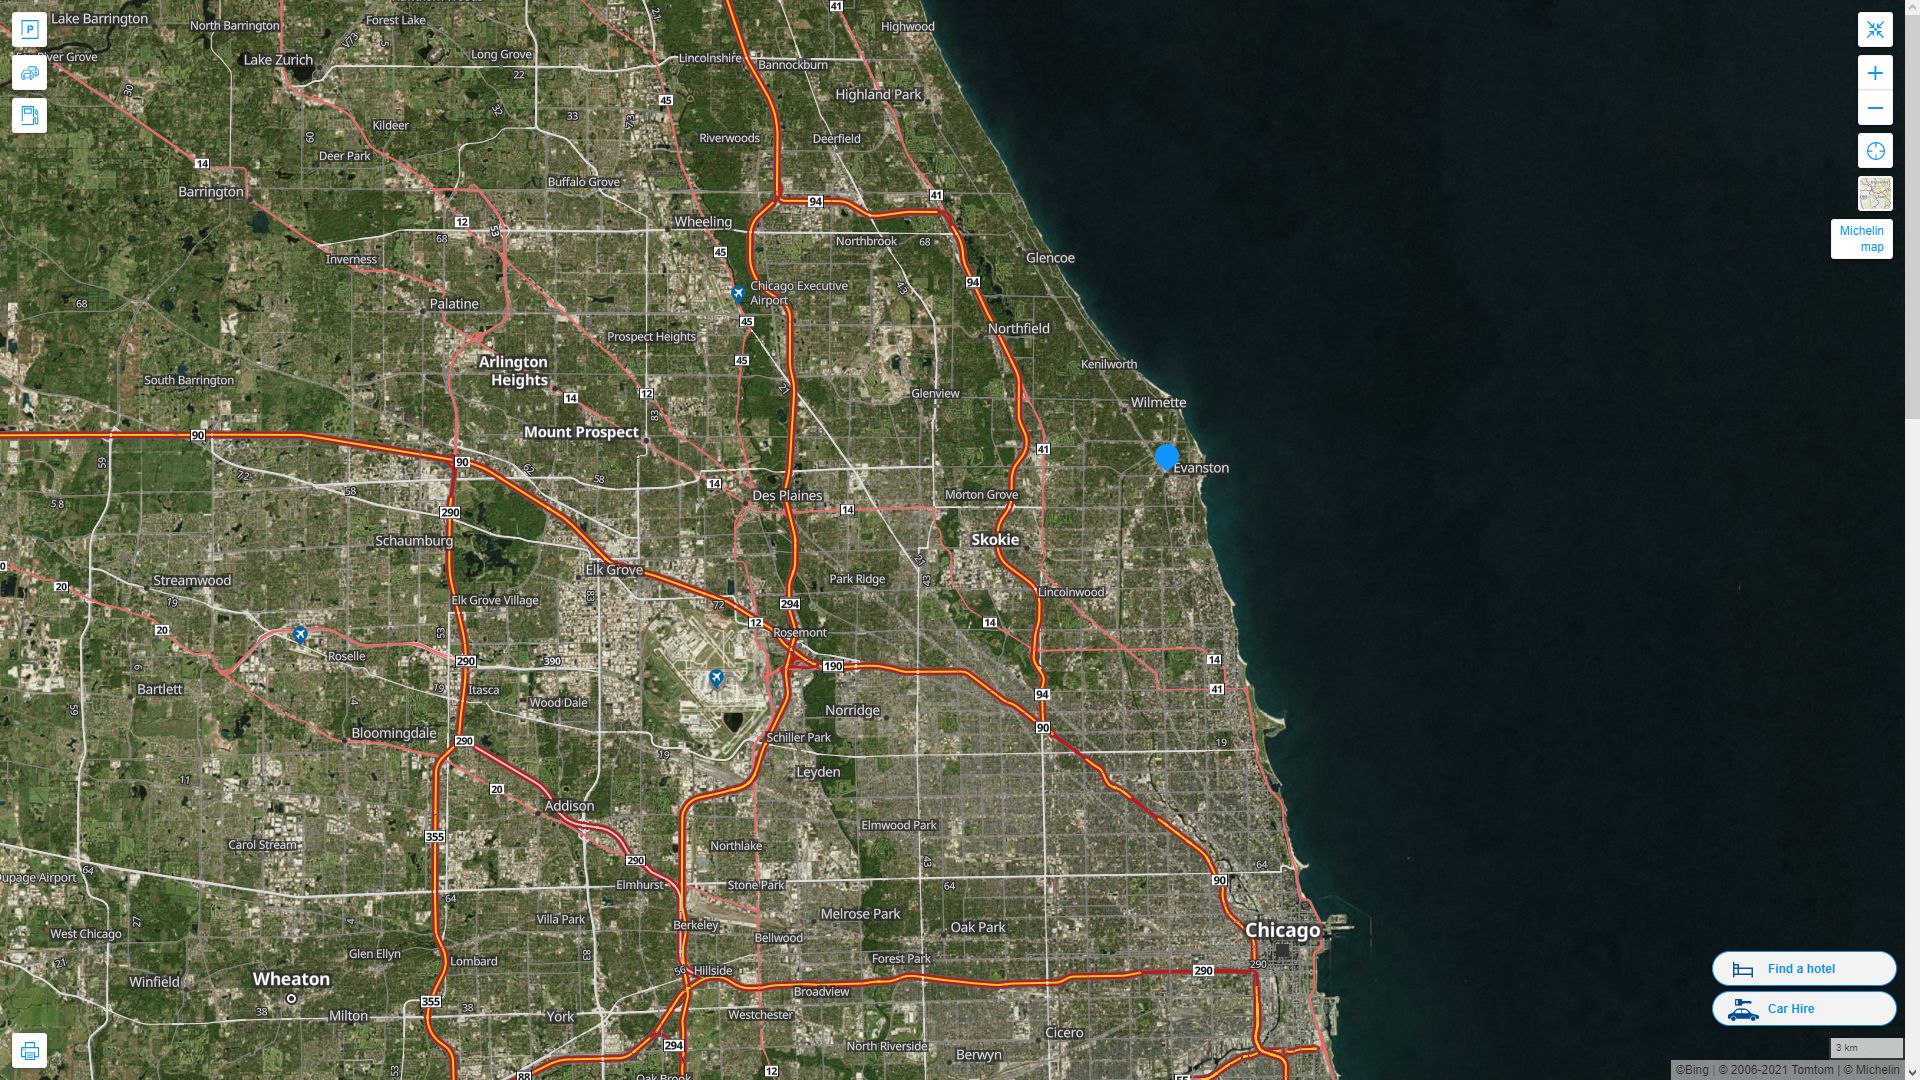 Evanston illinois Highway and Road Map with Satellite View